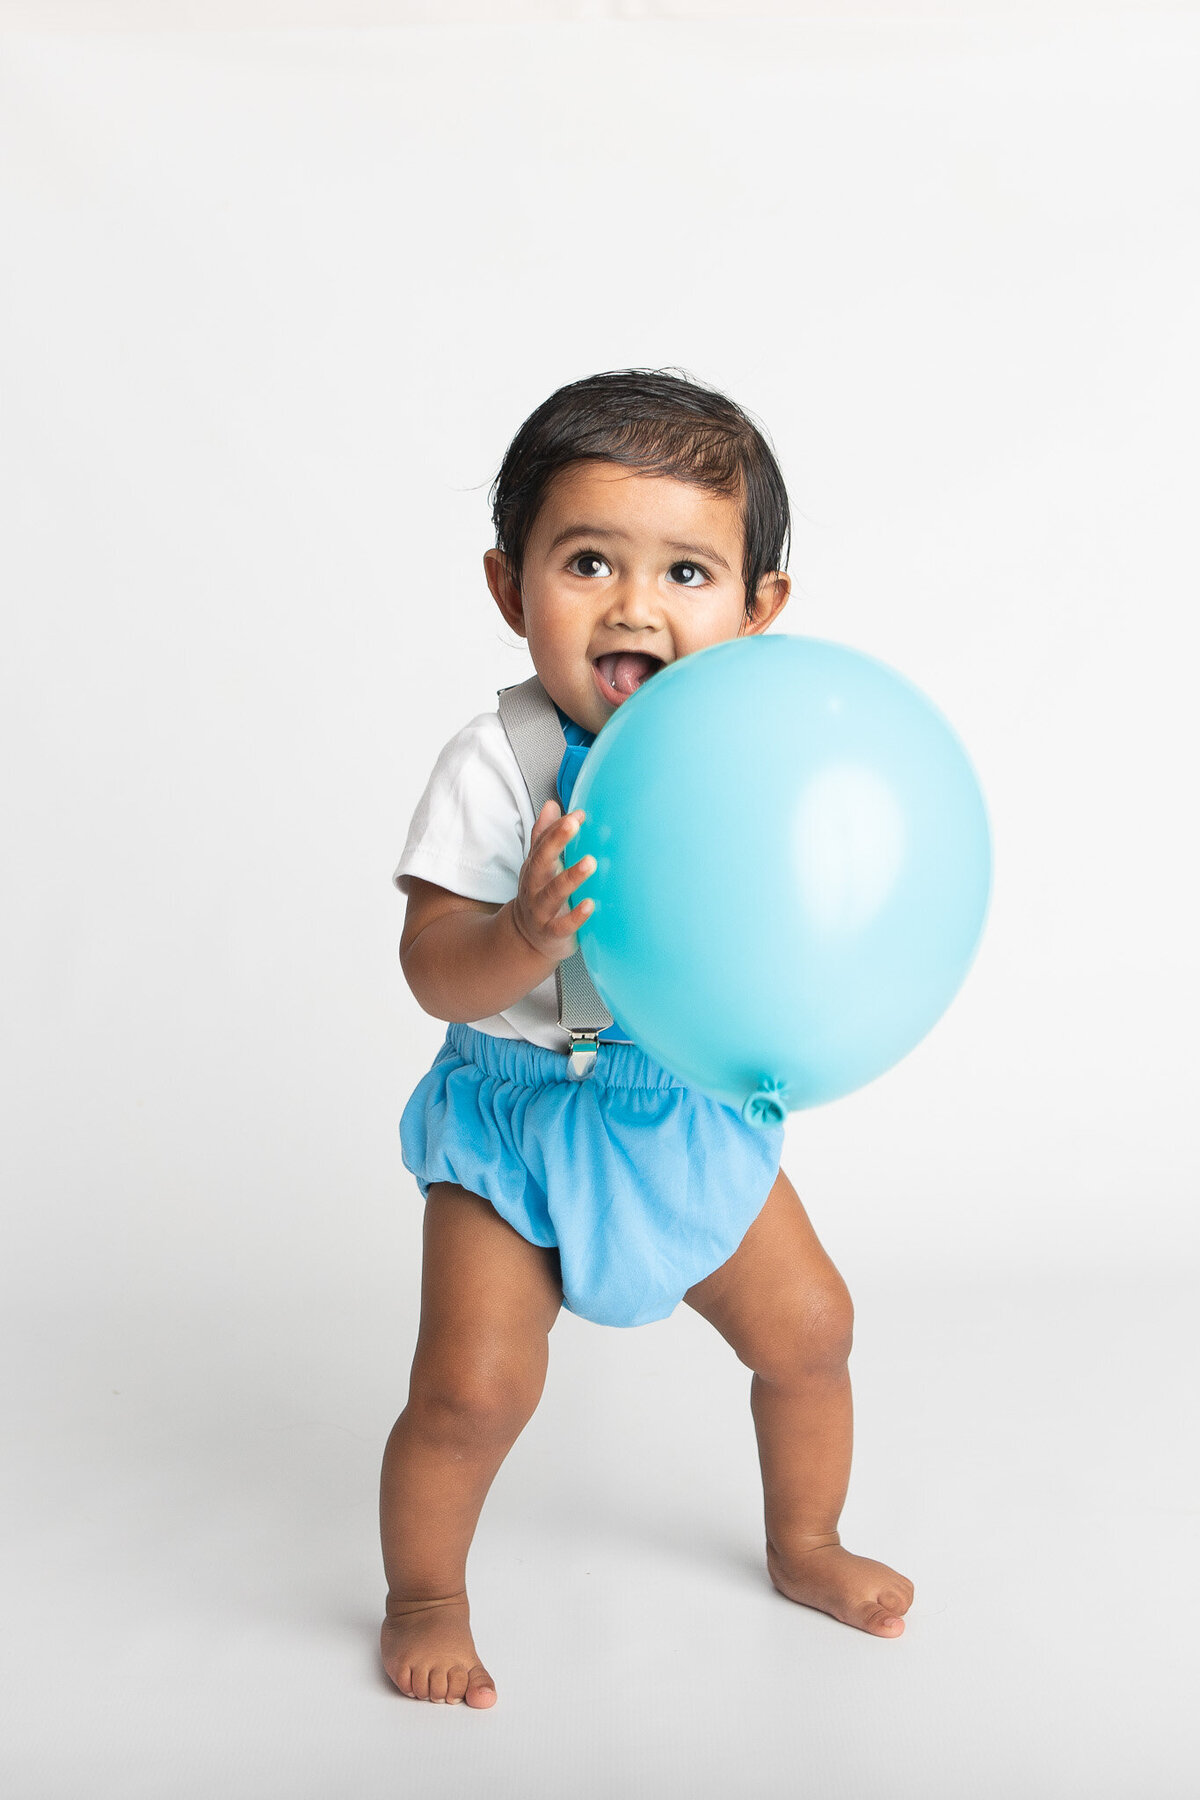 Baby holding a blue balloon